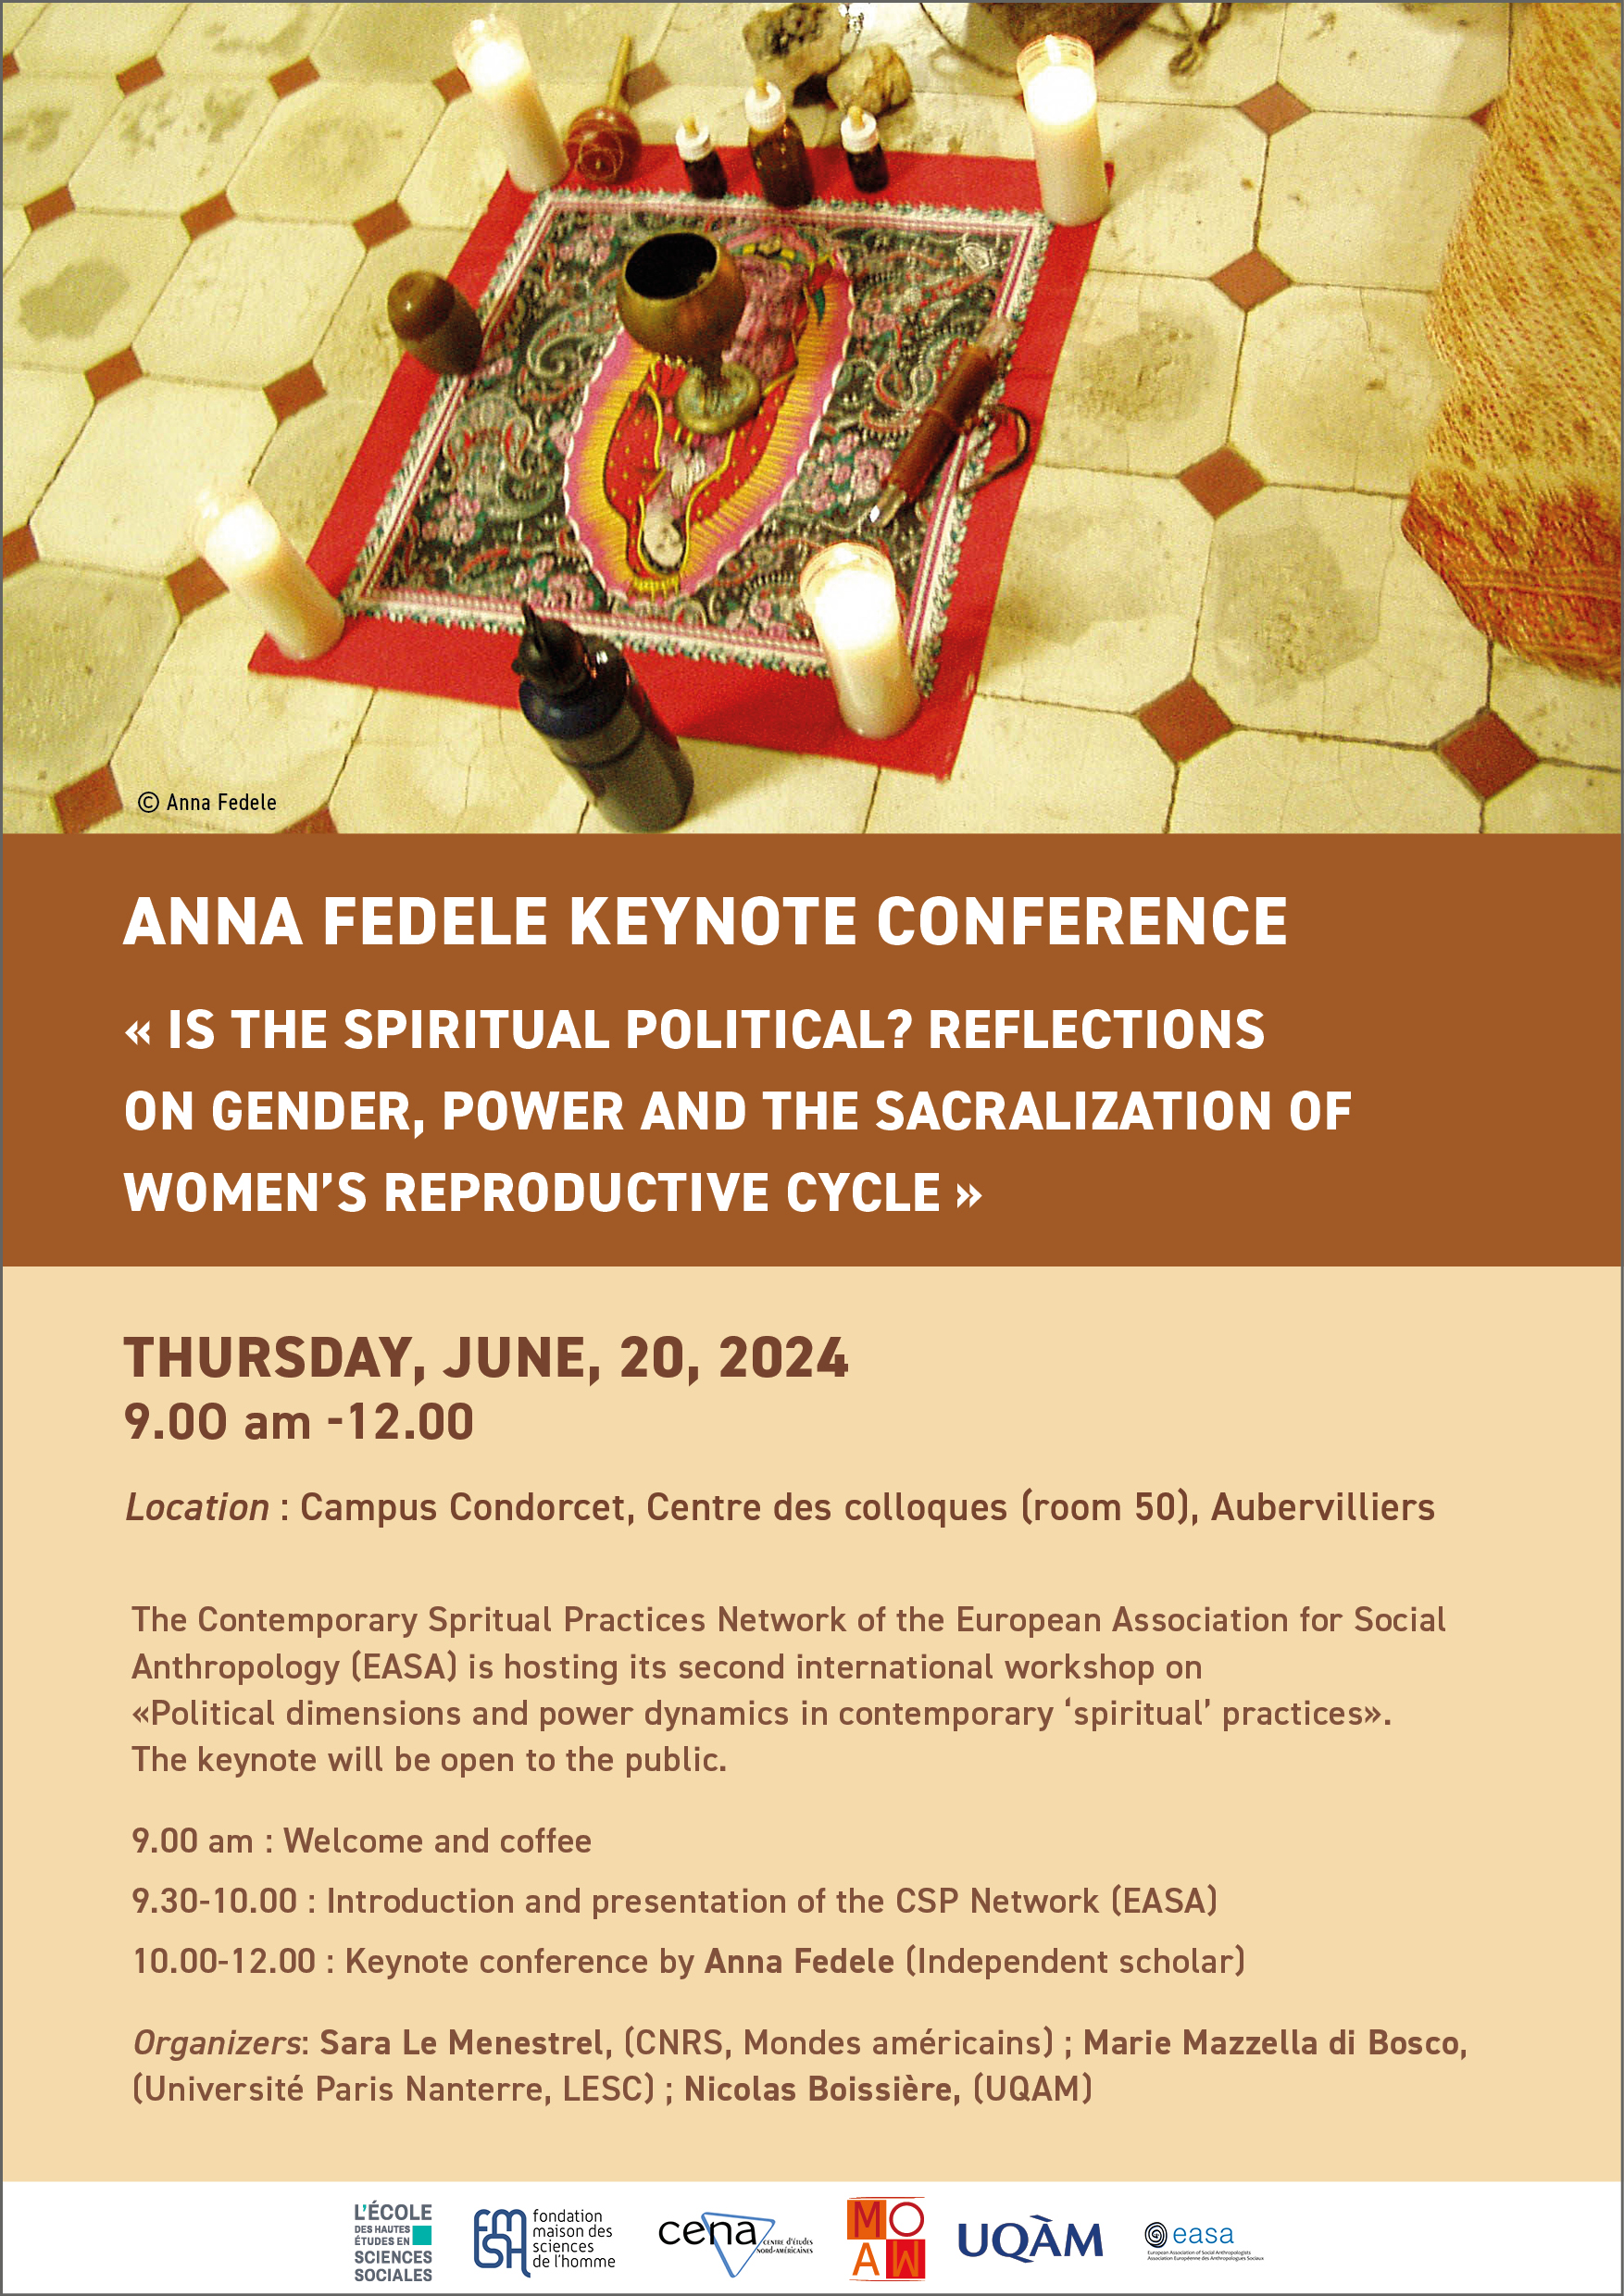 Keynote conference by Anna Fedele